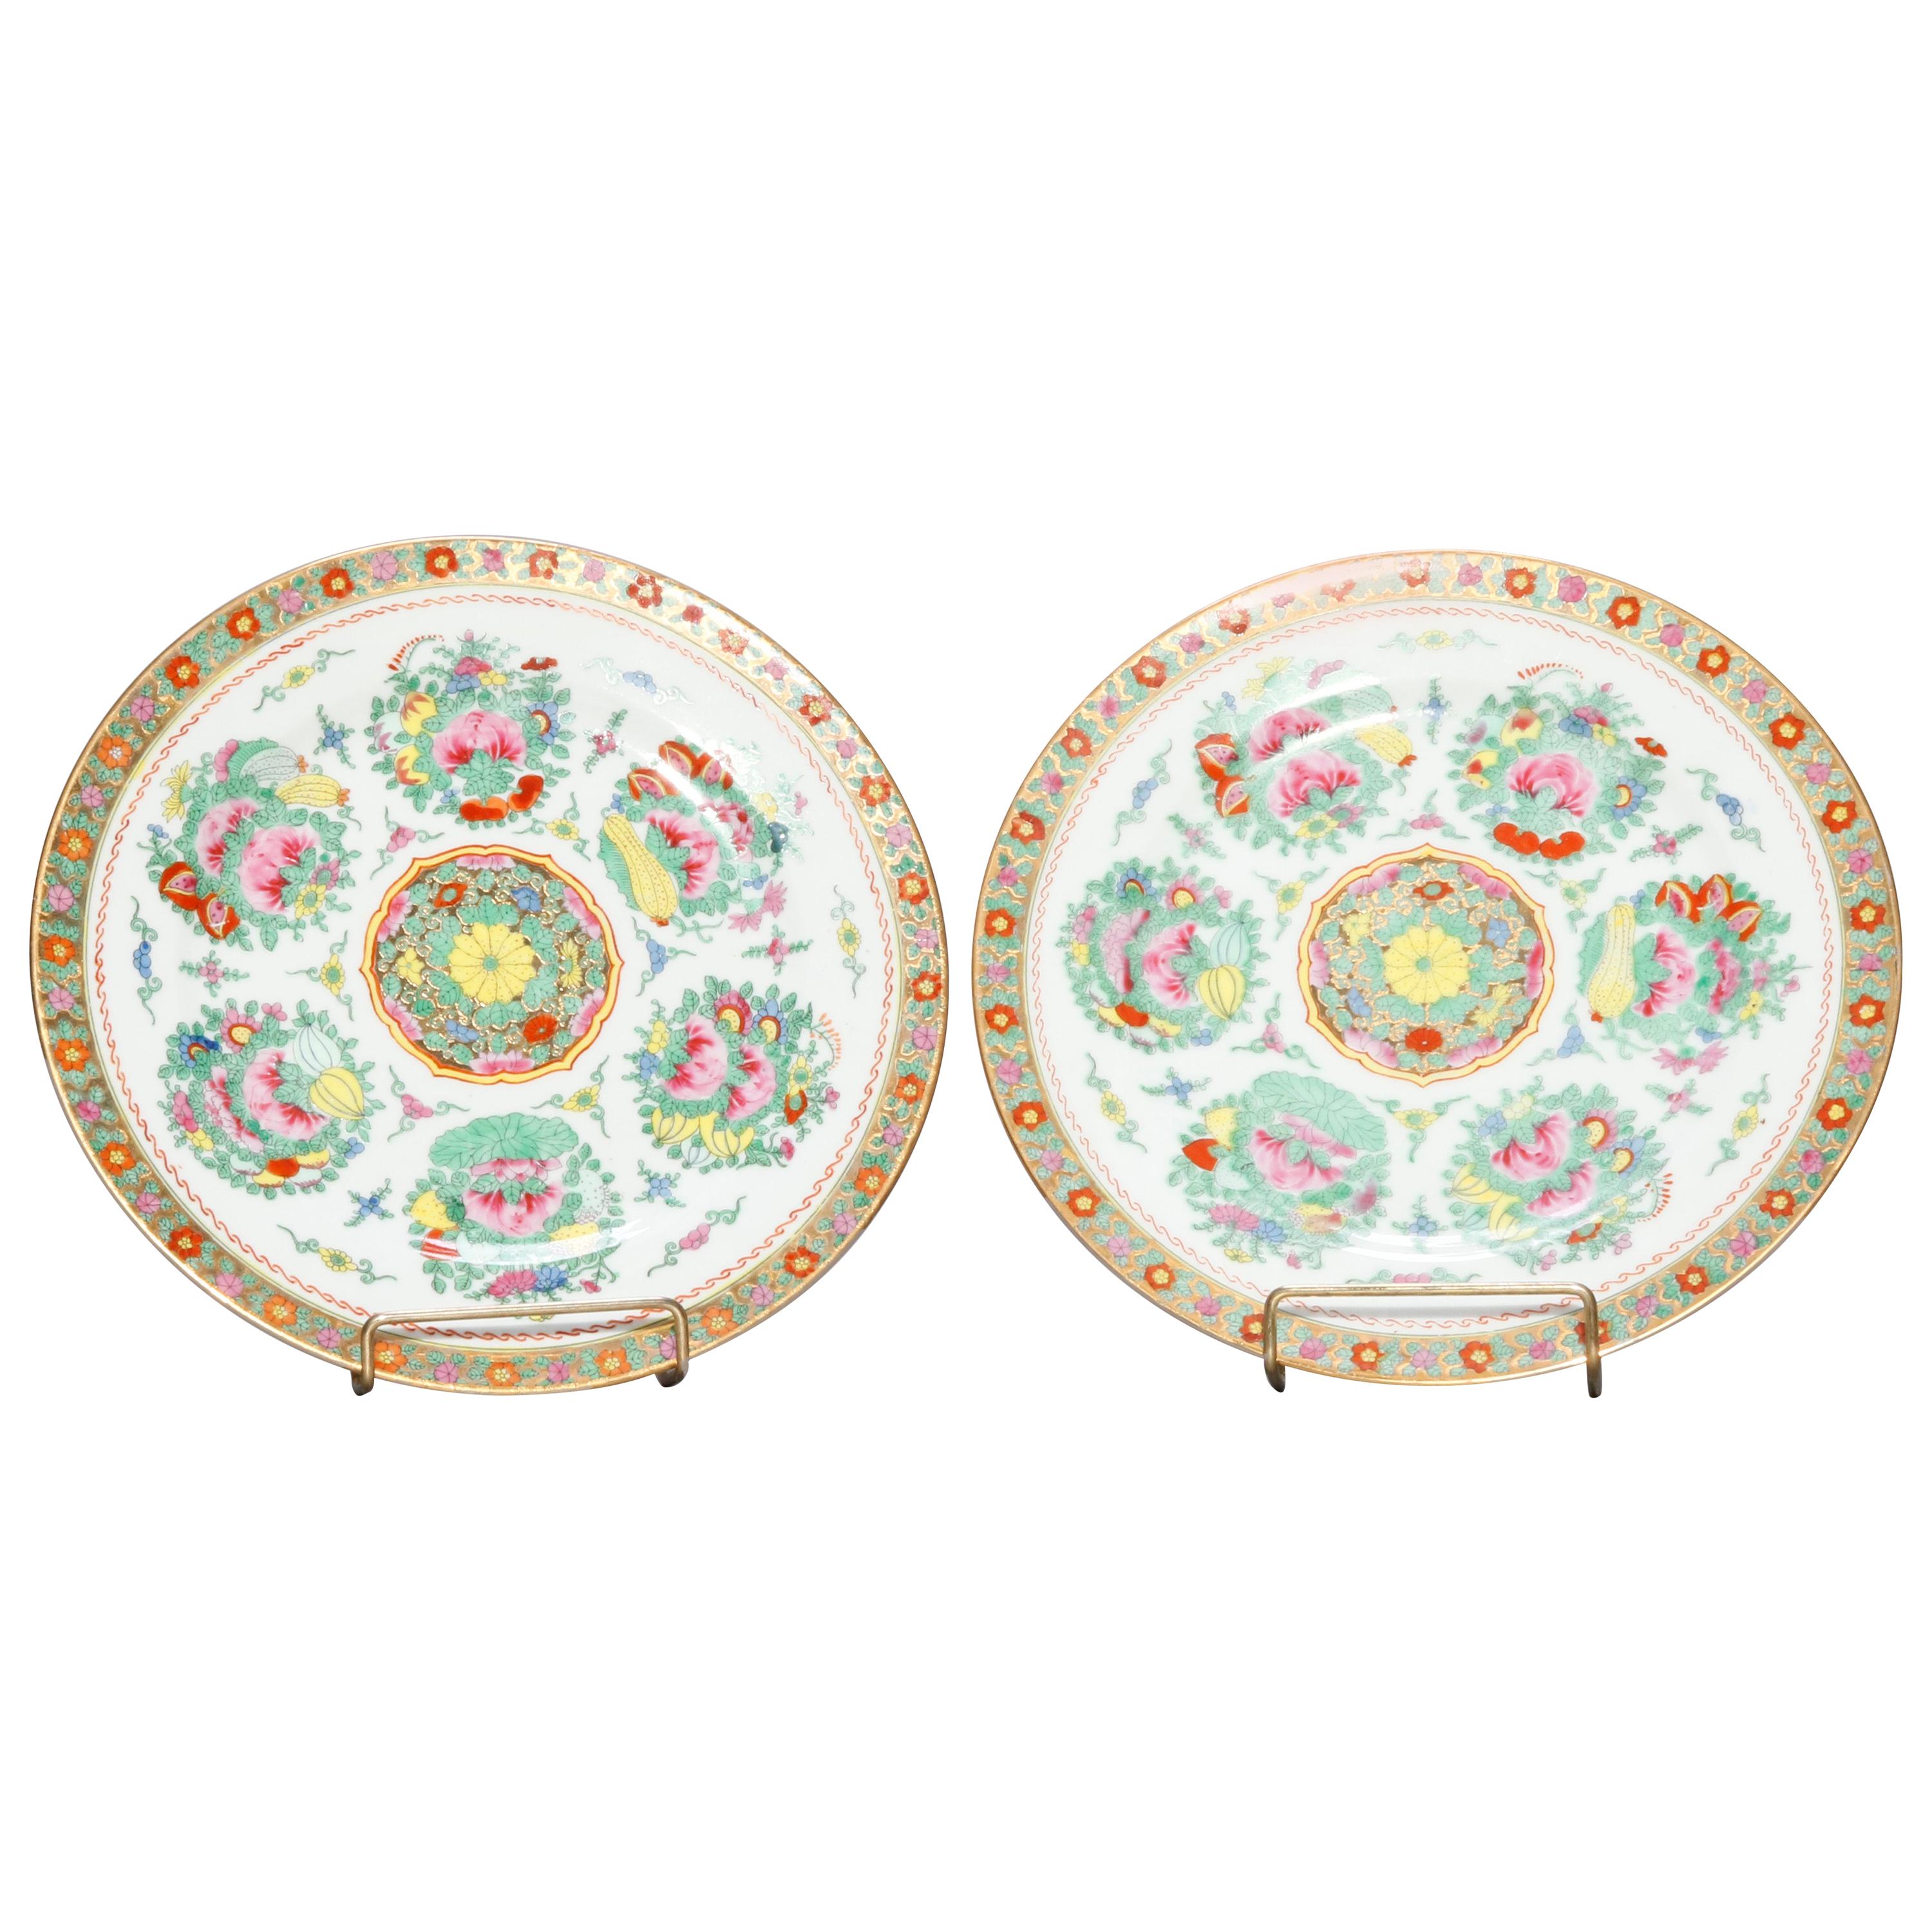 Pair of Chinese Porcelain Floral and Gilt Plates, Signed, 20th Century